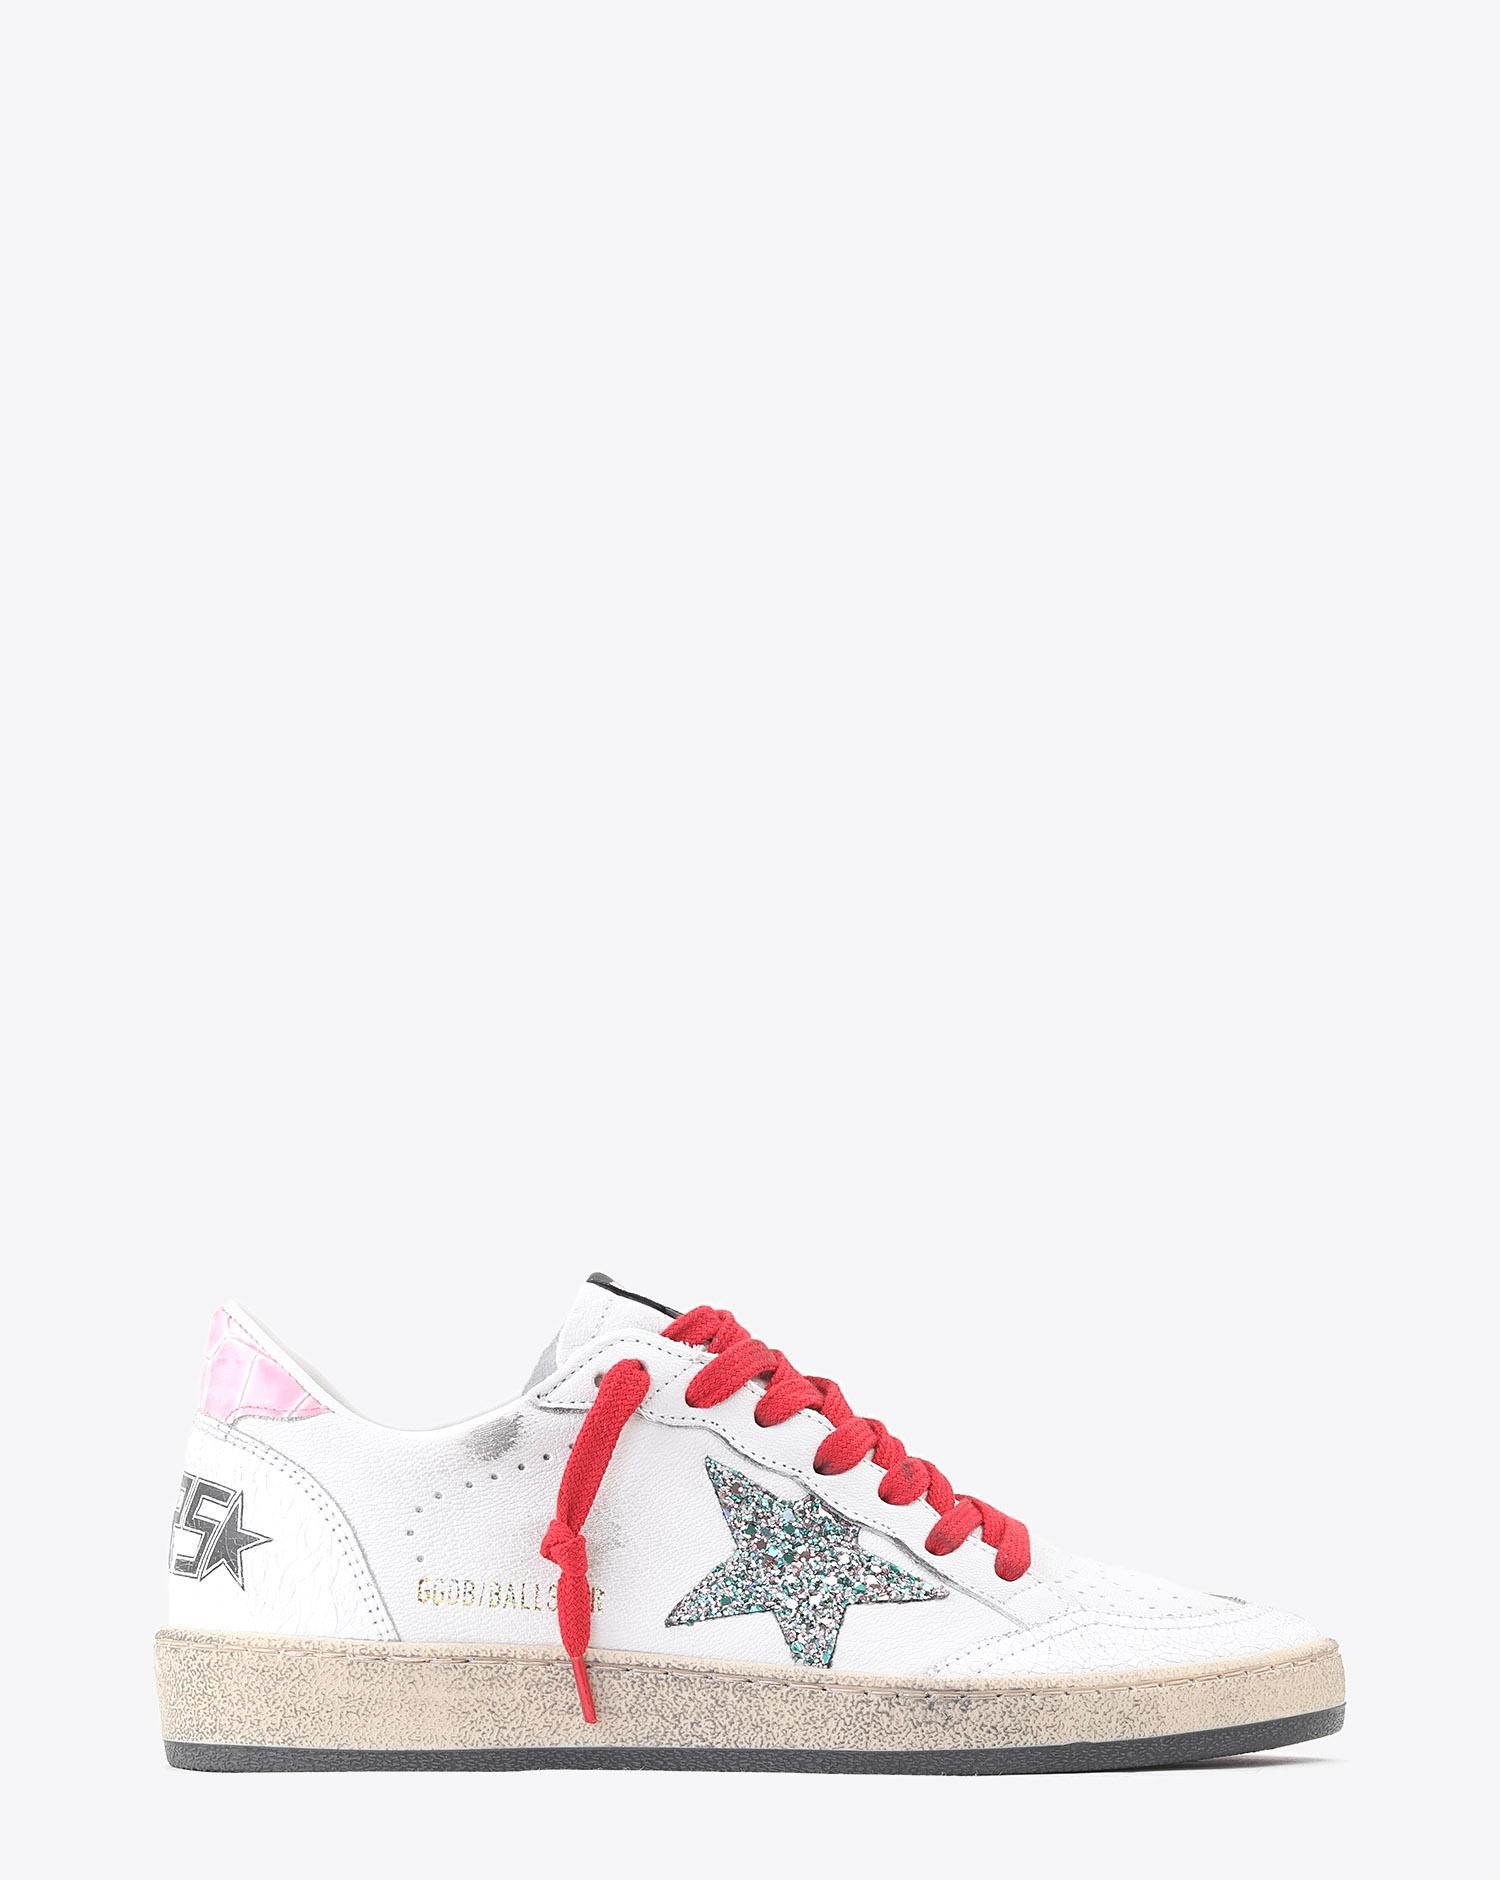 Golden Goose Woman Collection Sneakers Ball Star - White Crack Leather - Pink Cocco - Multi Glitter Star  